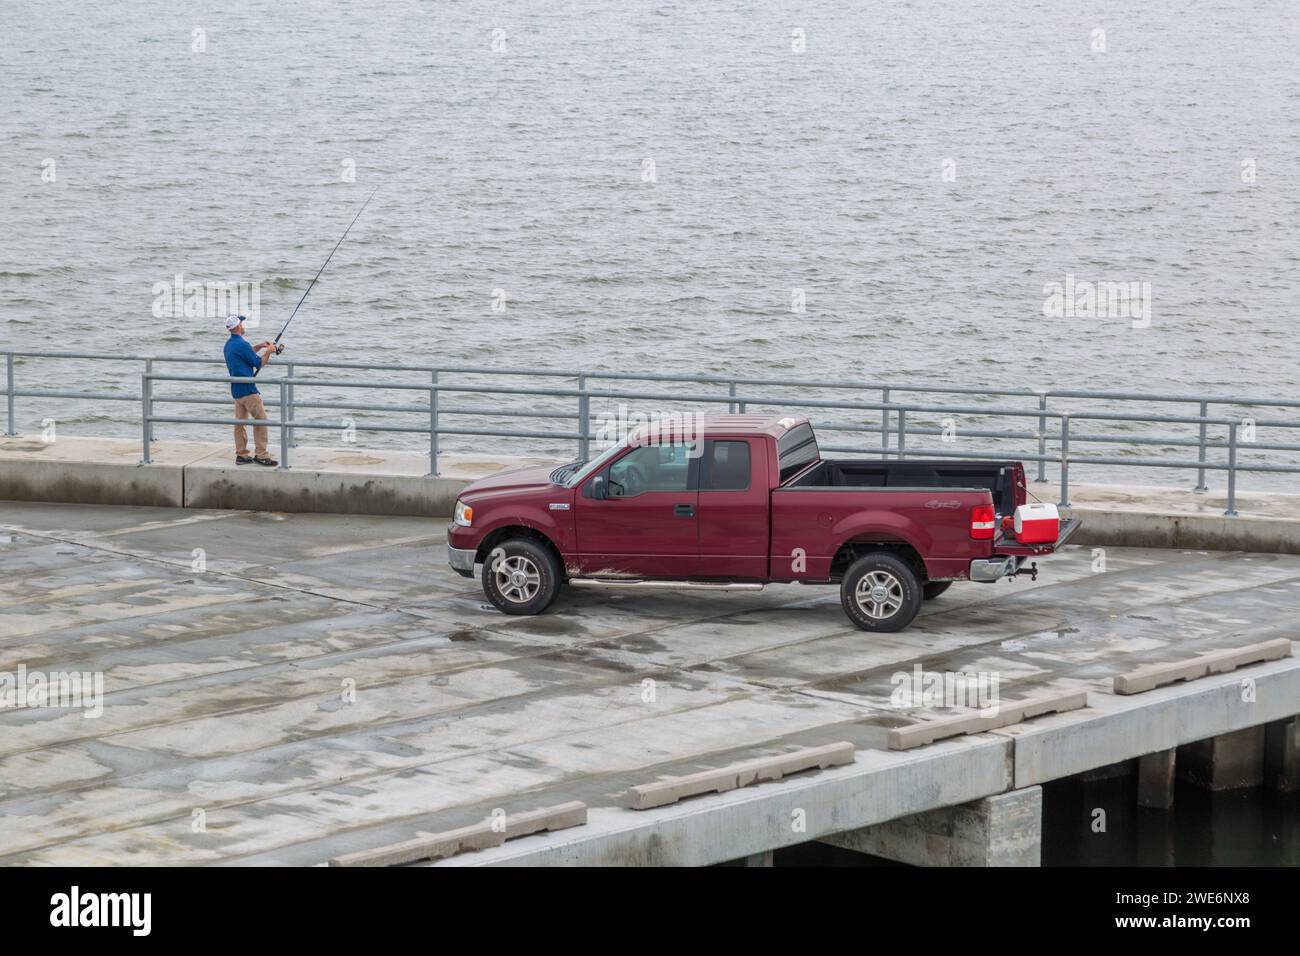 A red Ford F150 Sport pickup truck parked in an outdoor area surrounded by  shrubbery and trees Stock Photo - Alamy